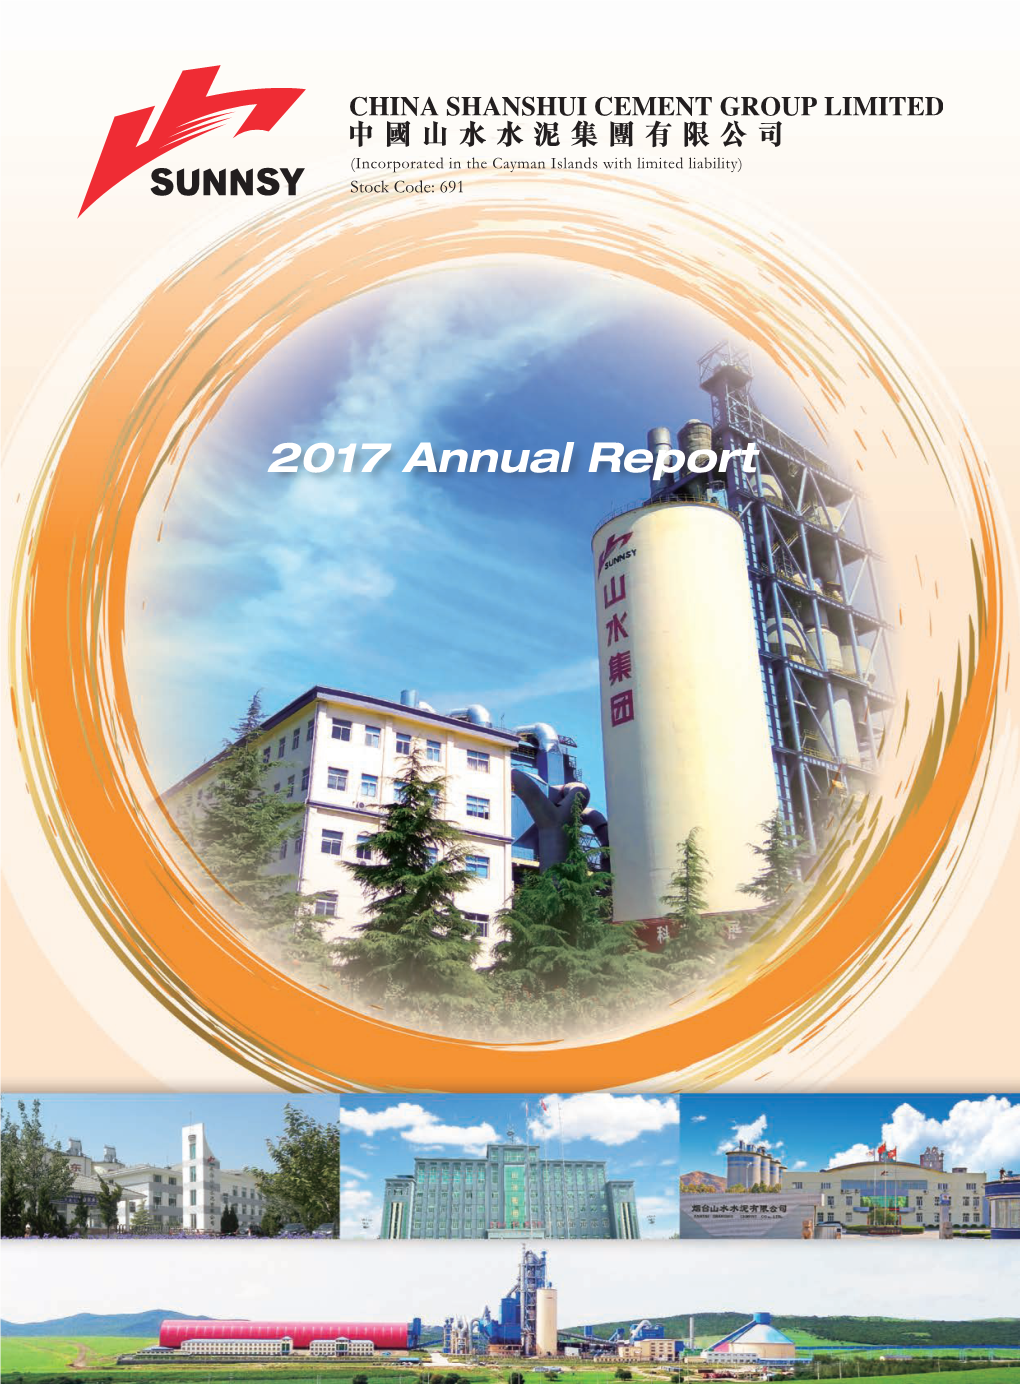 2017 Annual Report Contents